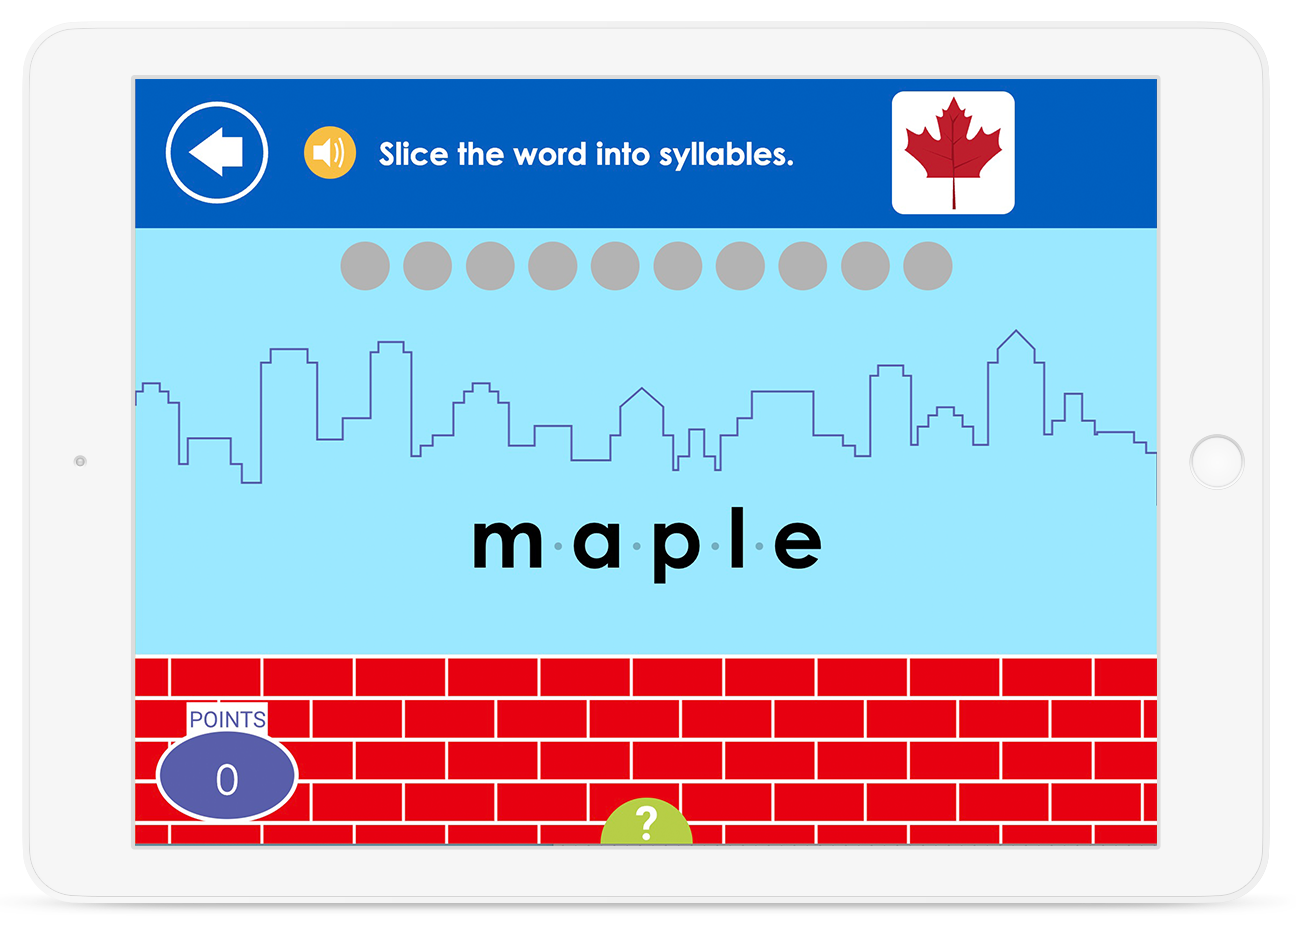 Practice splitting words into syllables in order to develop decoding skills for multi-syllabic words.